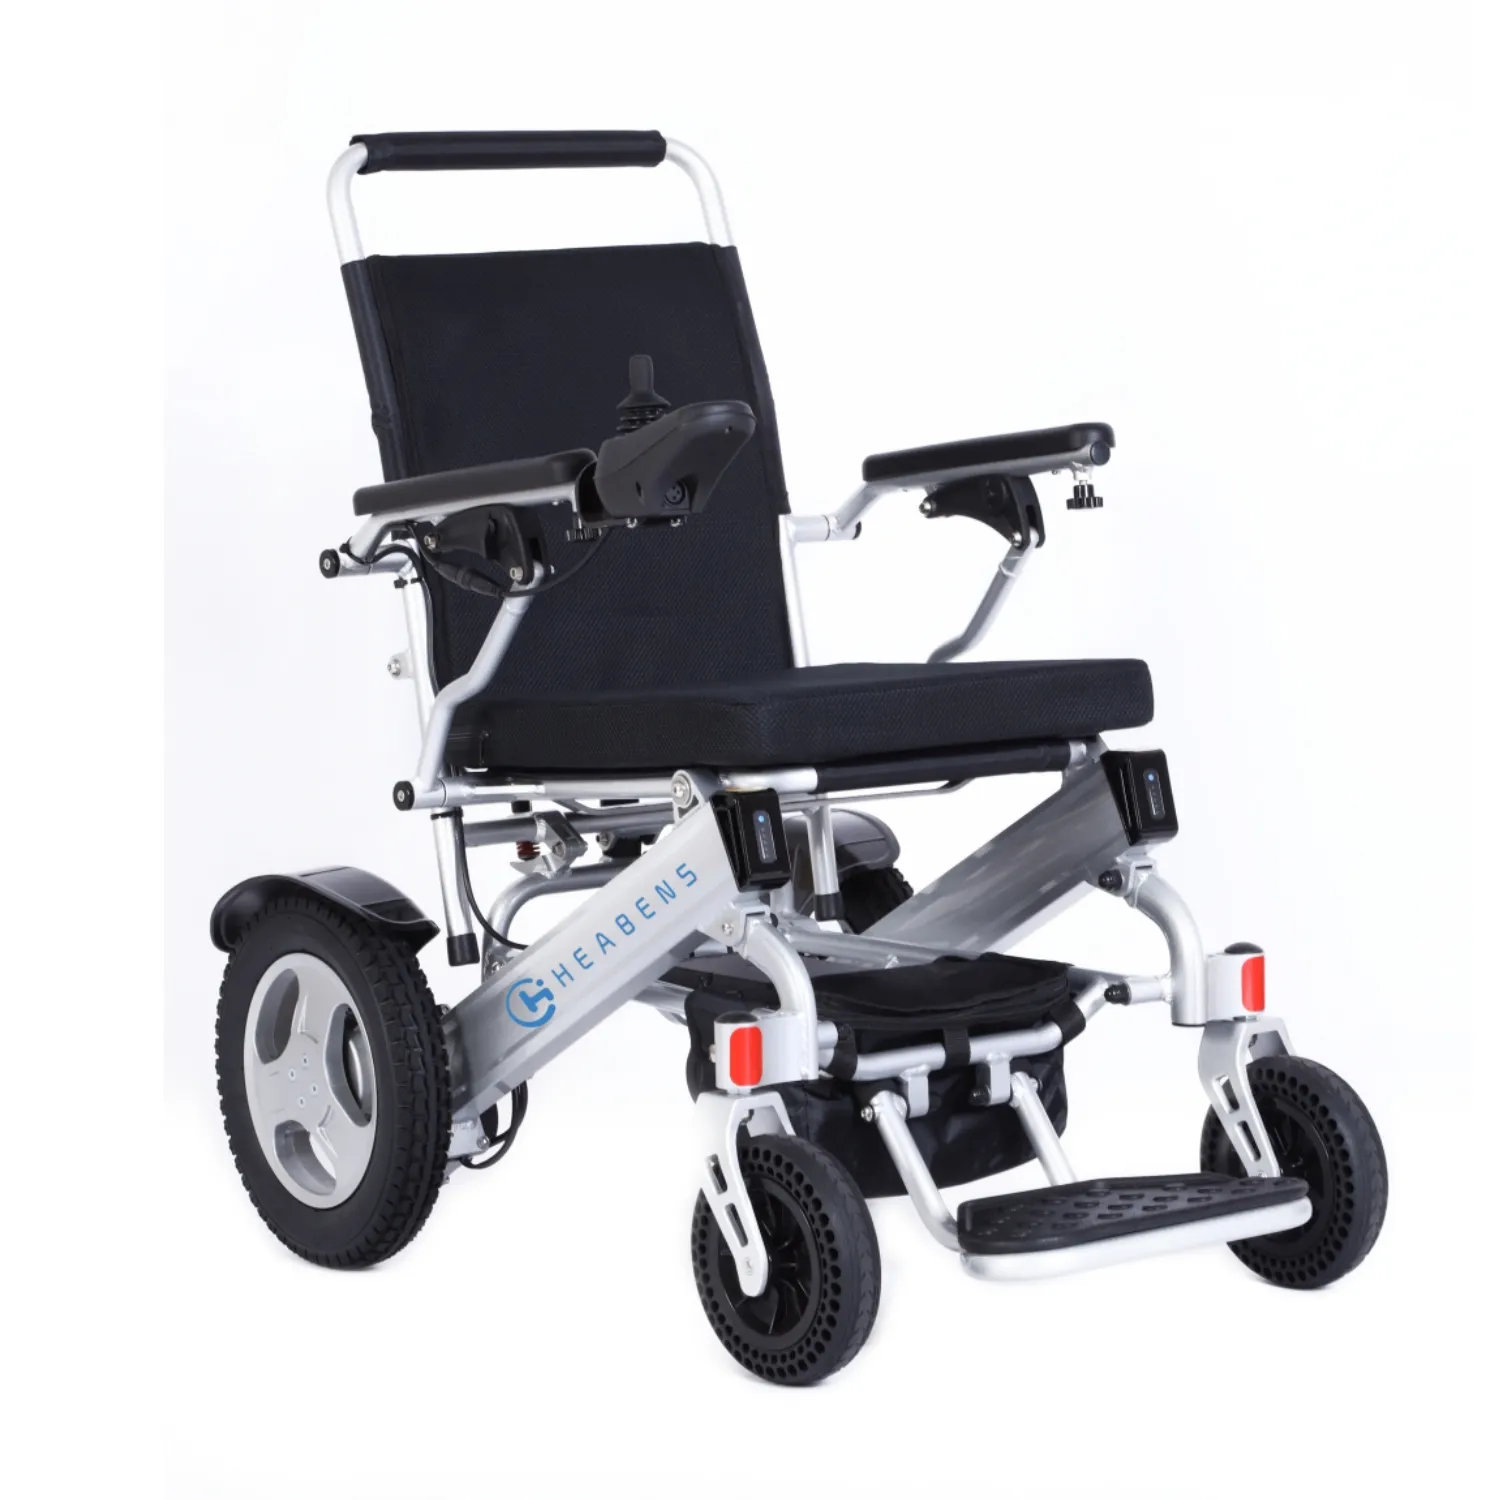 HBS0030 luxury lightweight handicapped motorized scooter brushless motors wheelchair folding electric wheelchairs